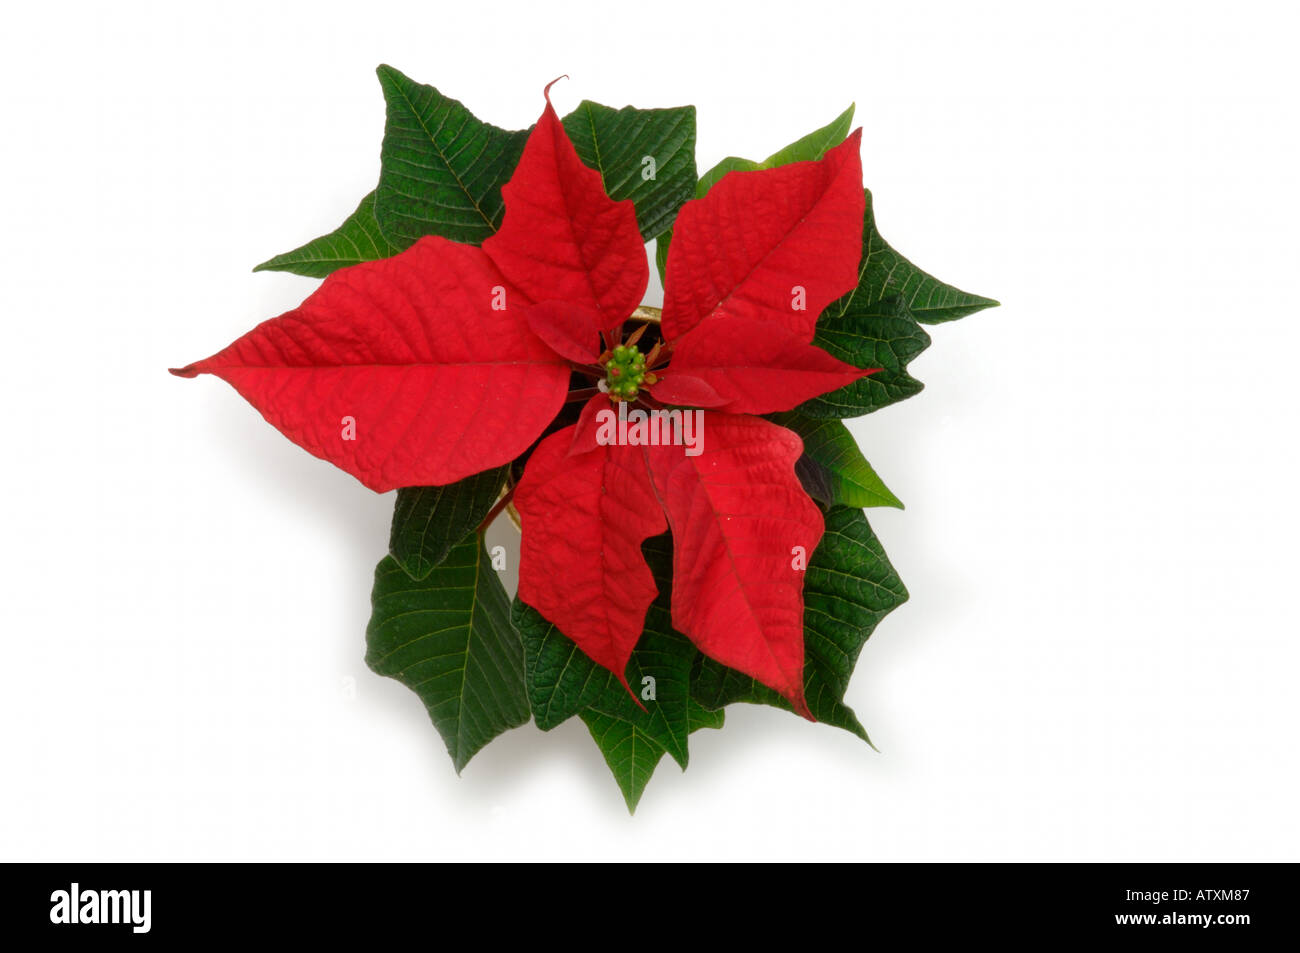 Top view of Red leaves of poinsettia house plant on white background Stock Photo